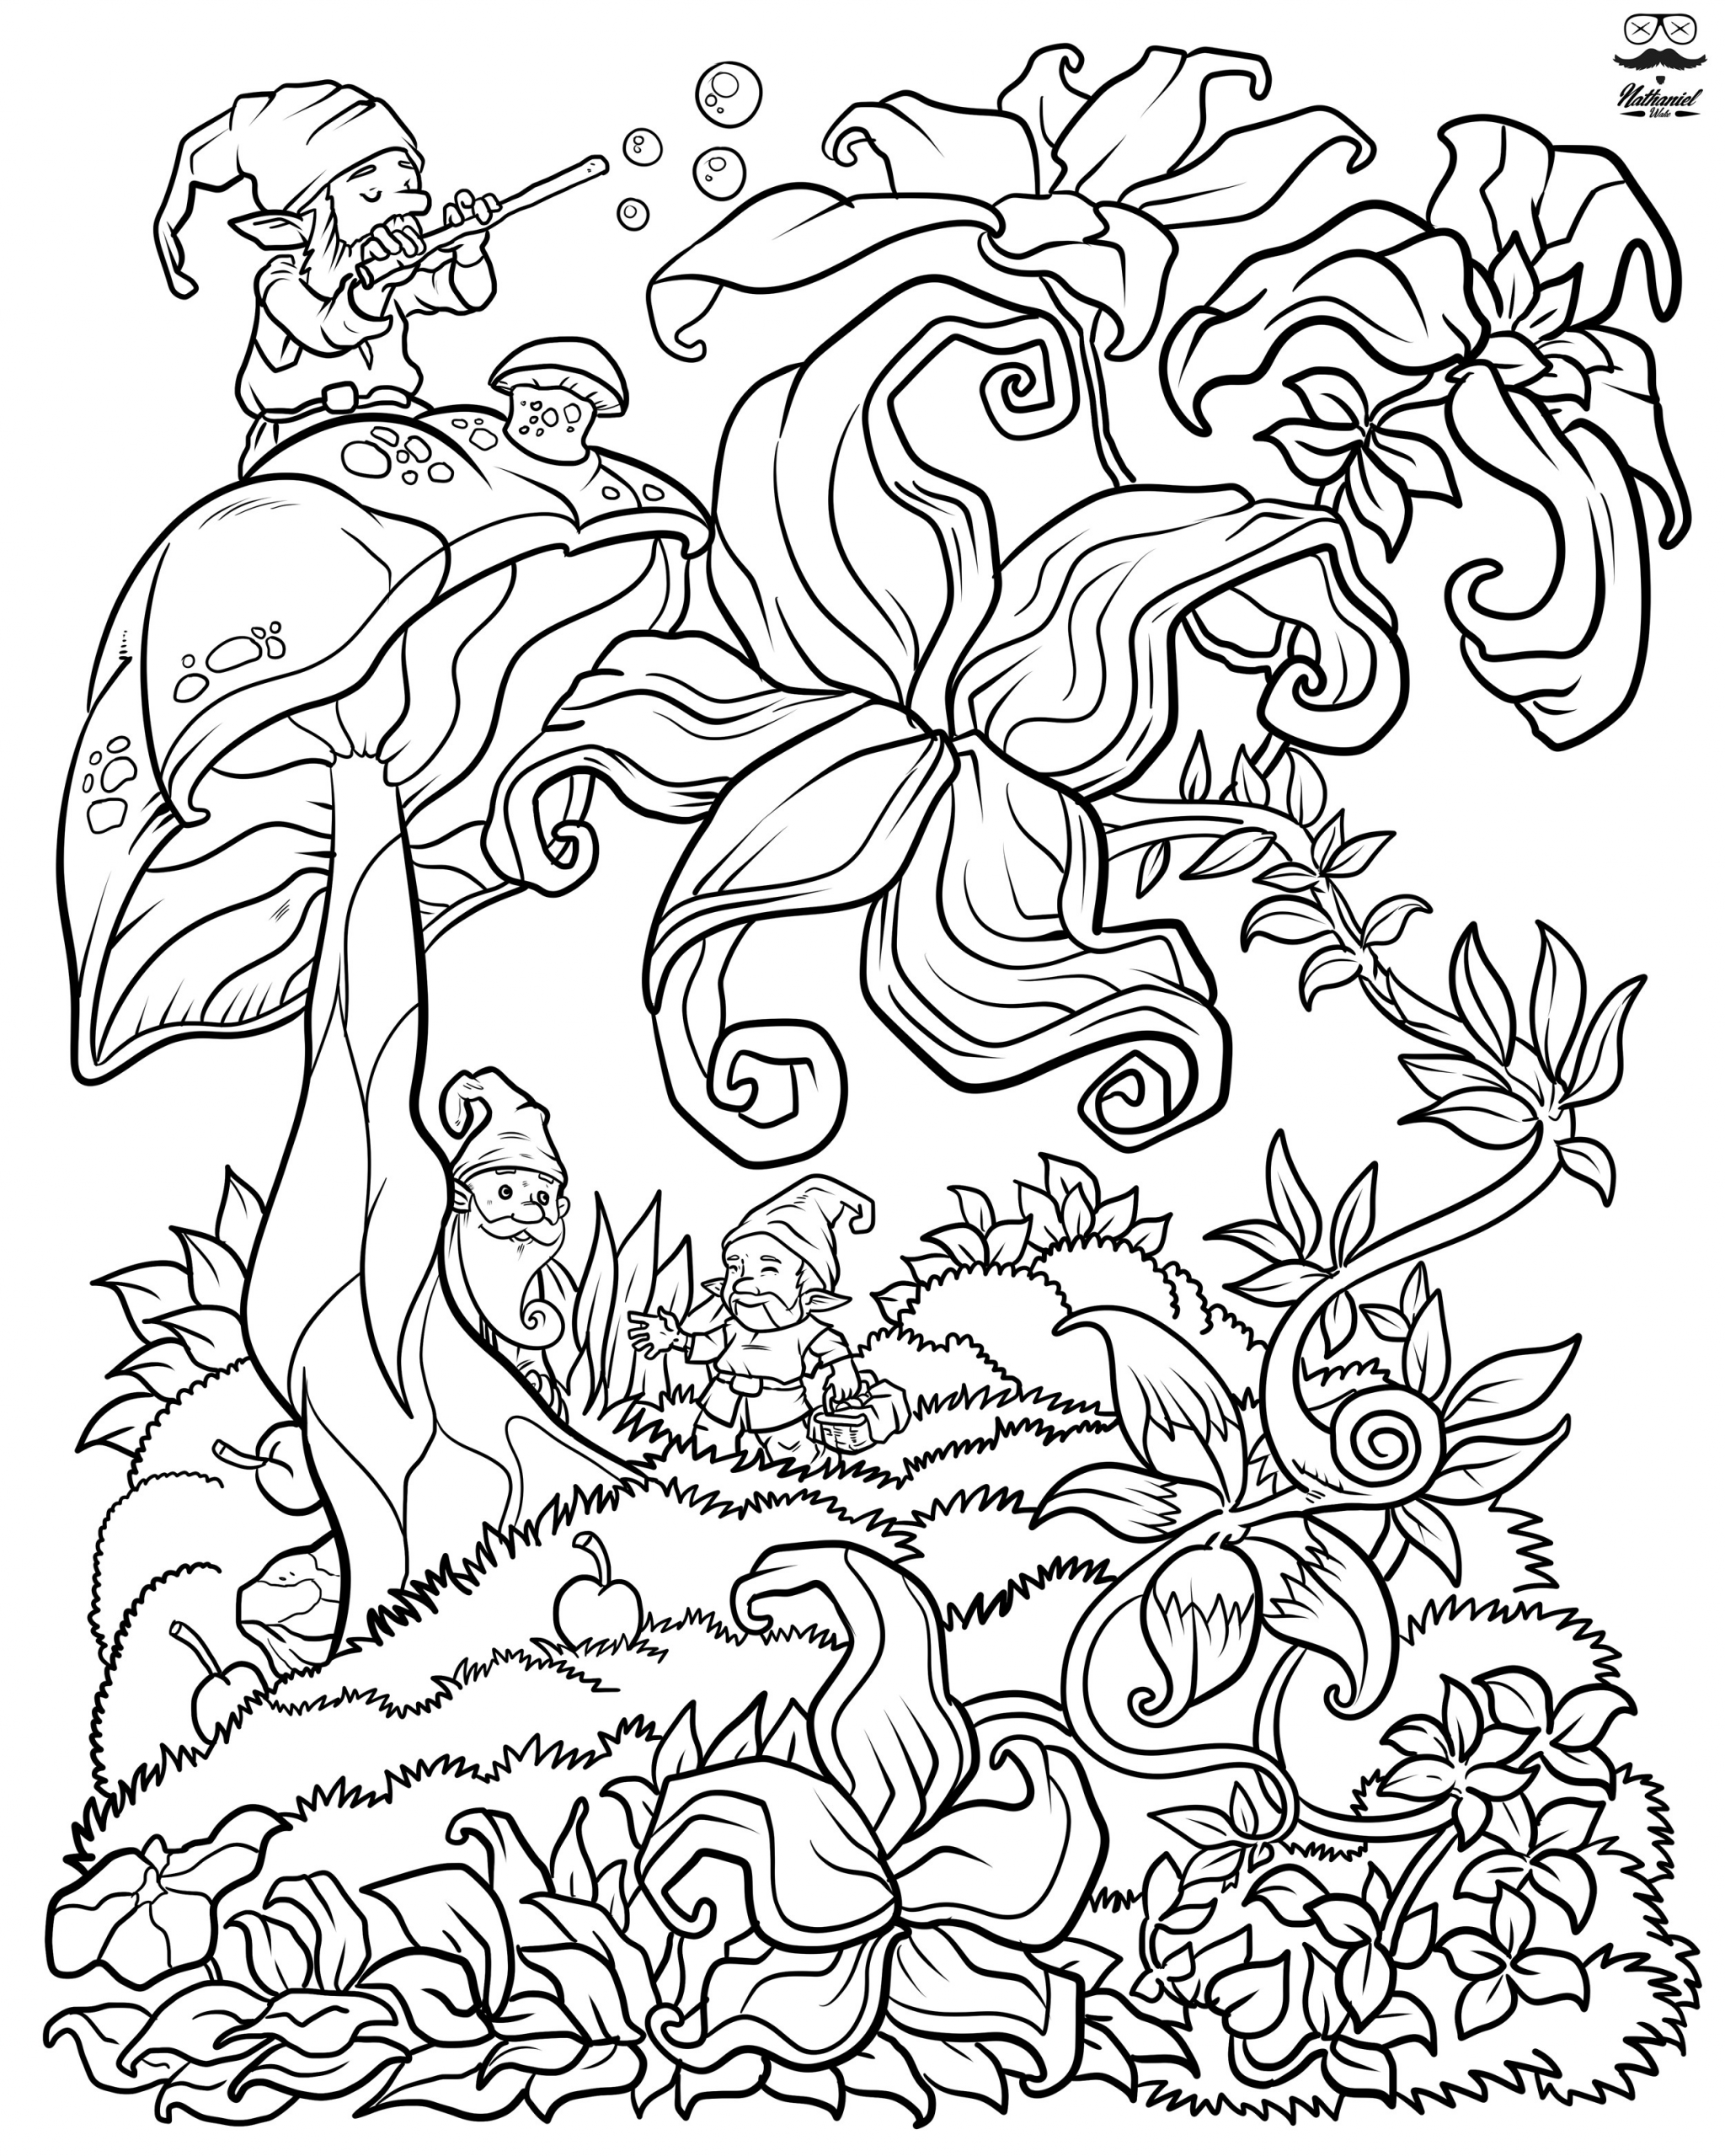 Online Coloring Books For Adults
 Floral Fantasy Digital Version Adult Coloring Book